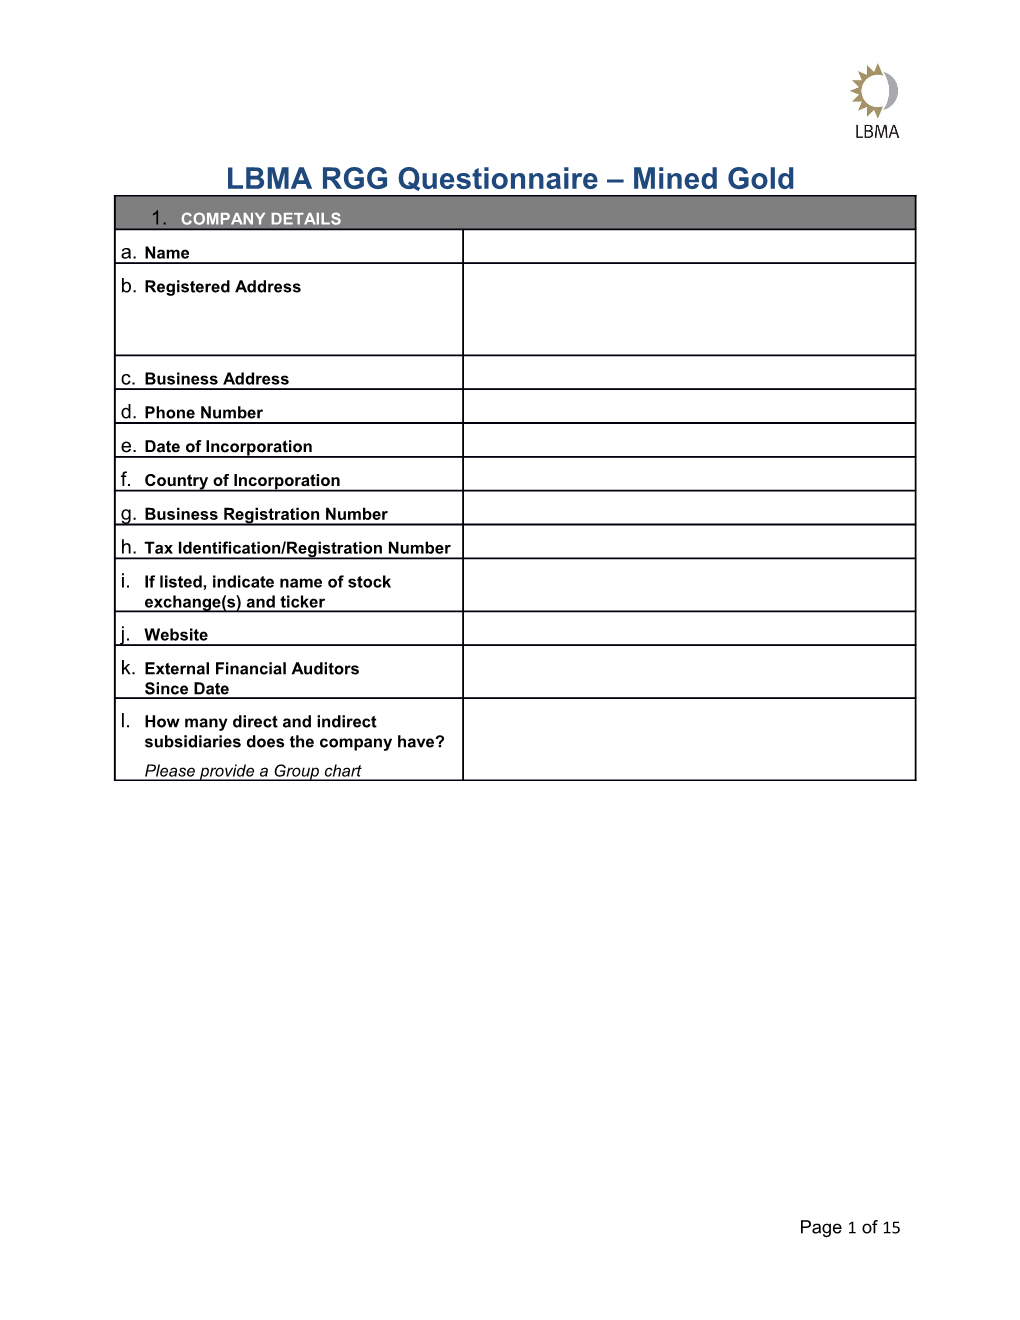 LBMA RGG Questionnaire Mined Gold